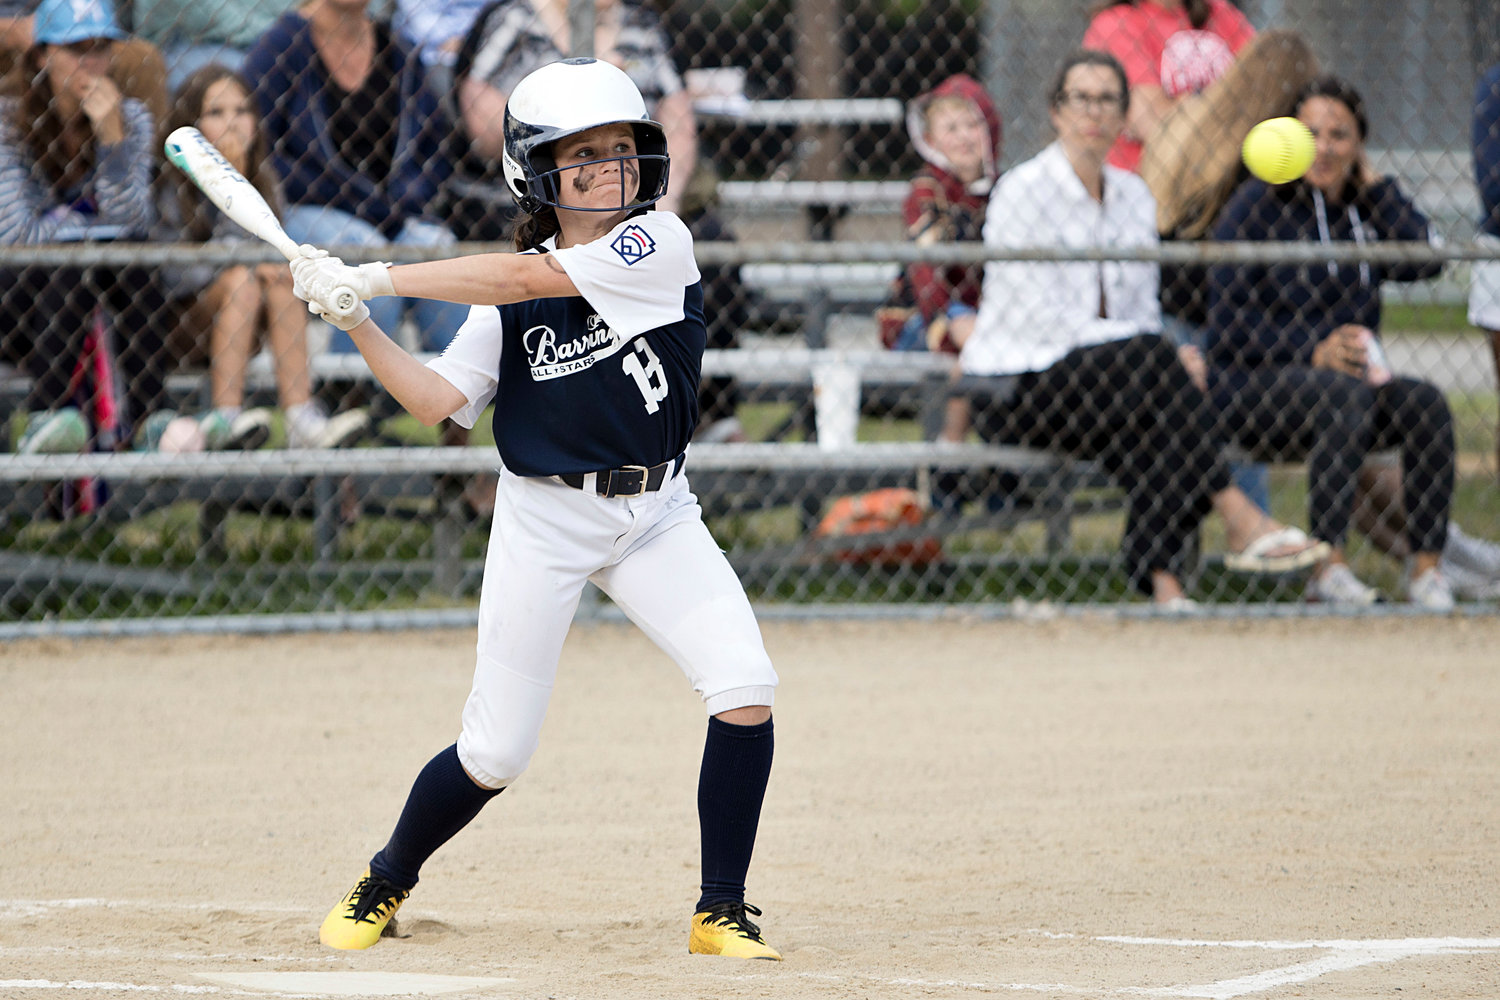 Keira Martin times the ball while up to bat against Middletown.